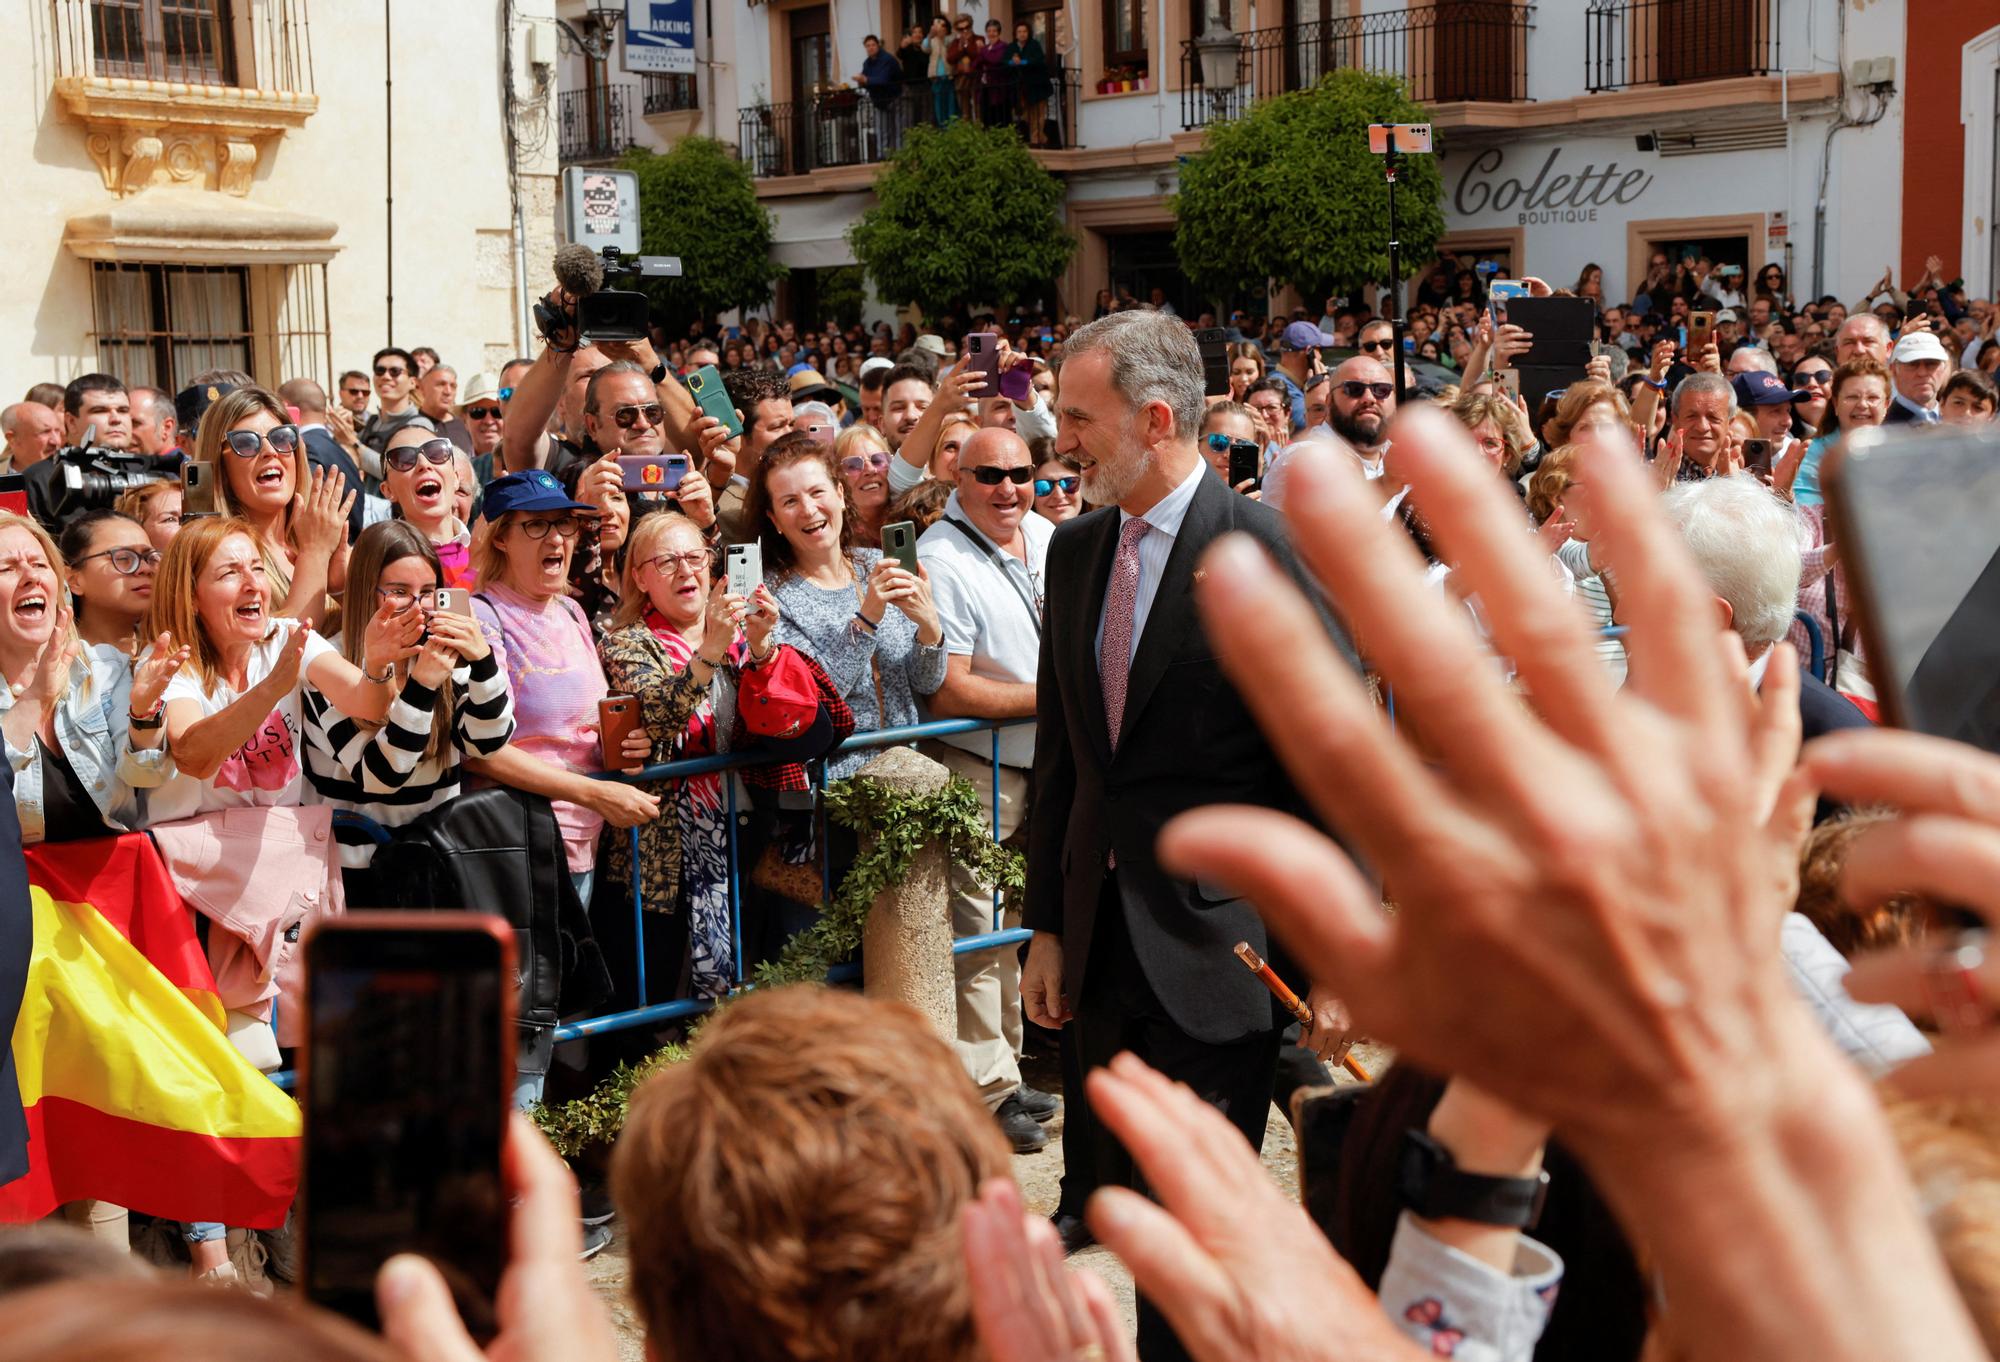 Spain's King Felipe VI arrives to attend the meeting of the five "Real Maestranzas de Caballeria", in Ronda